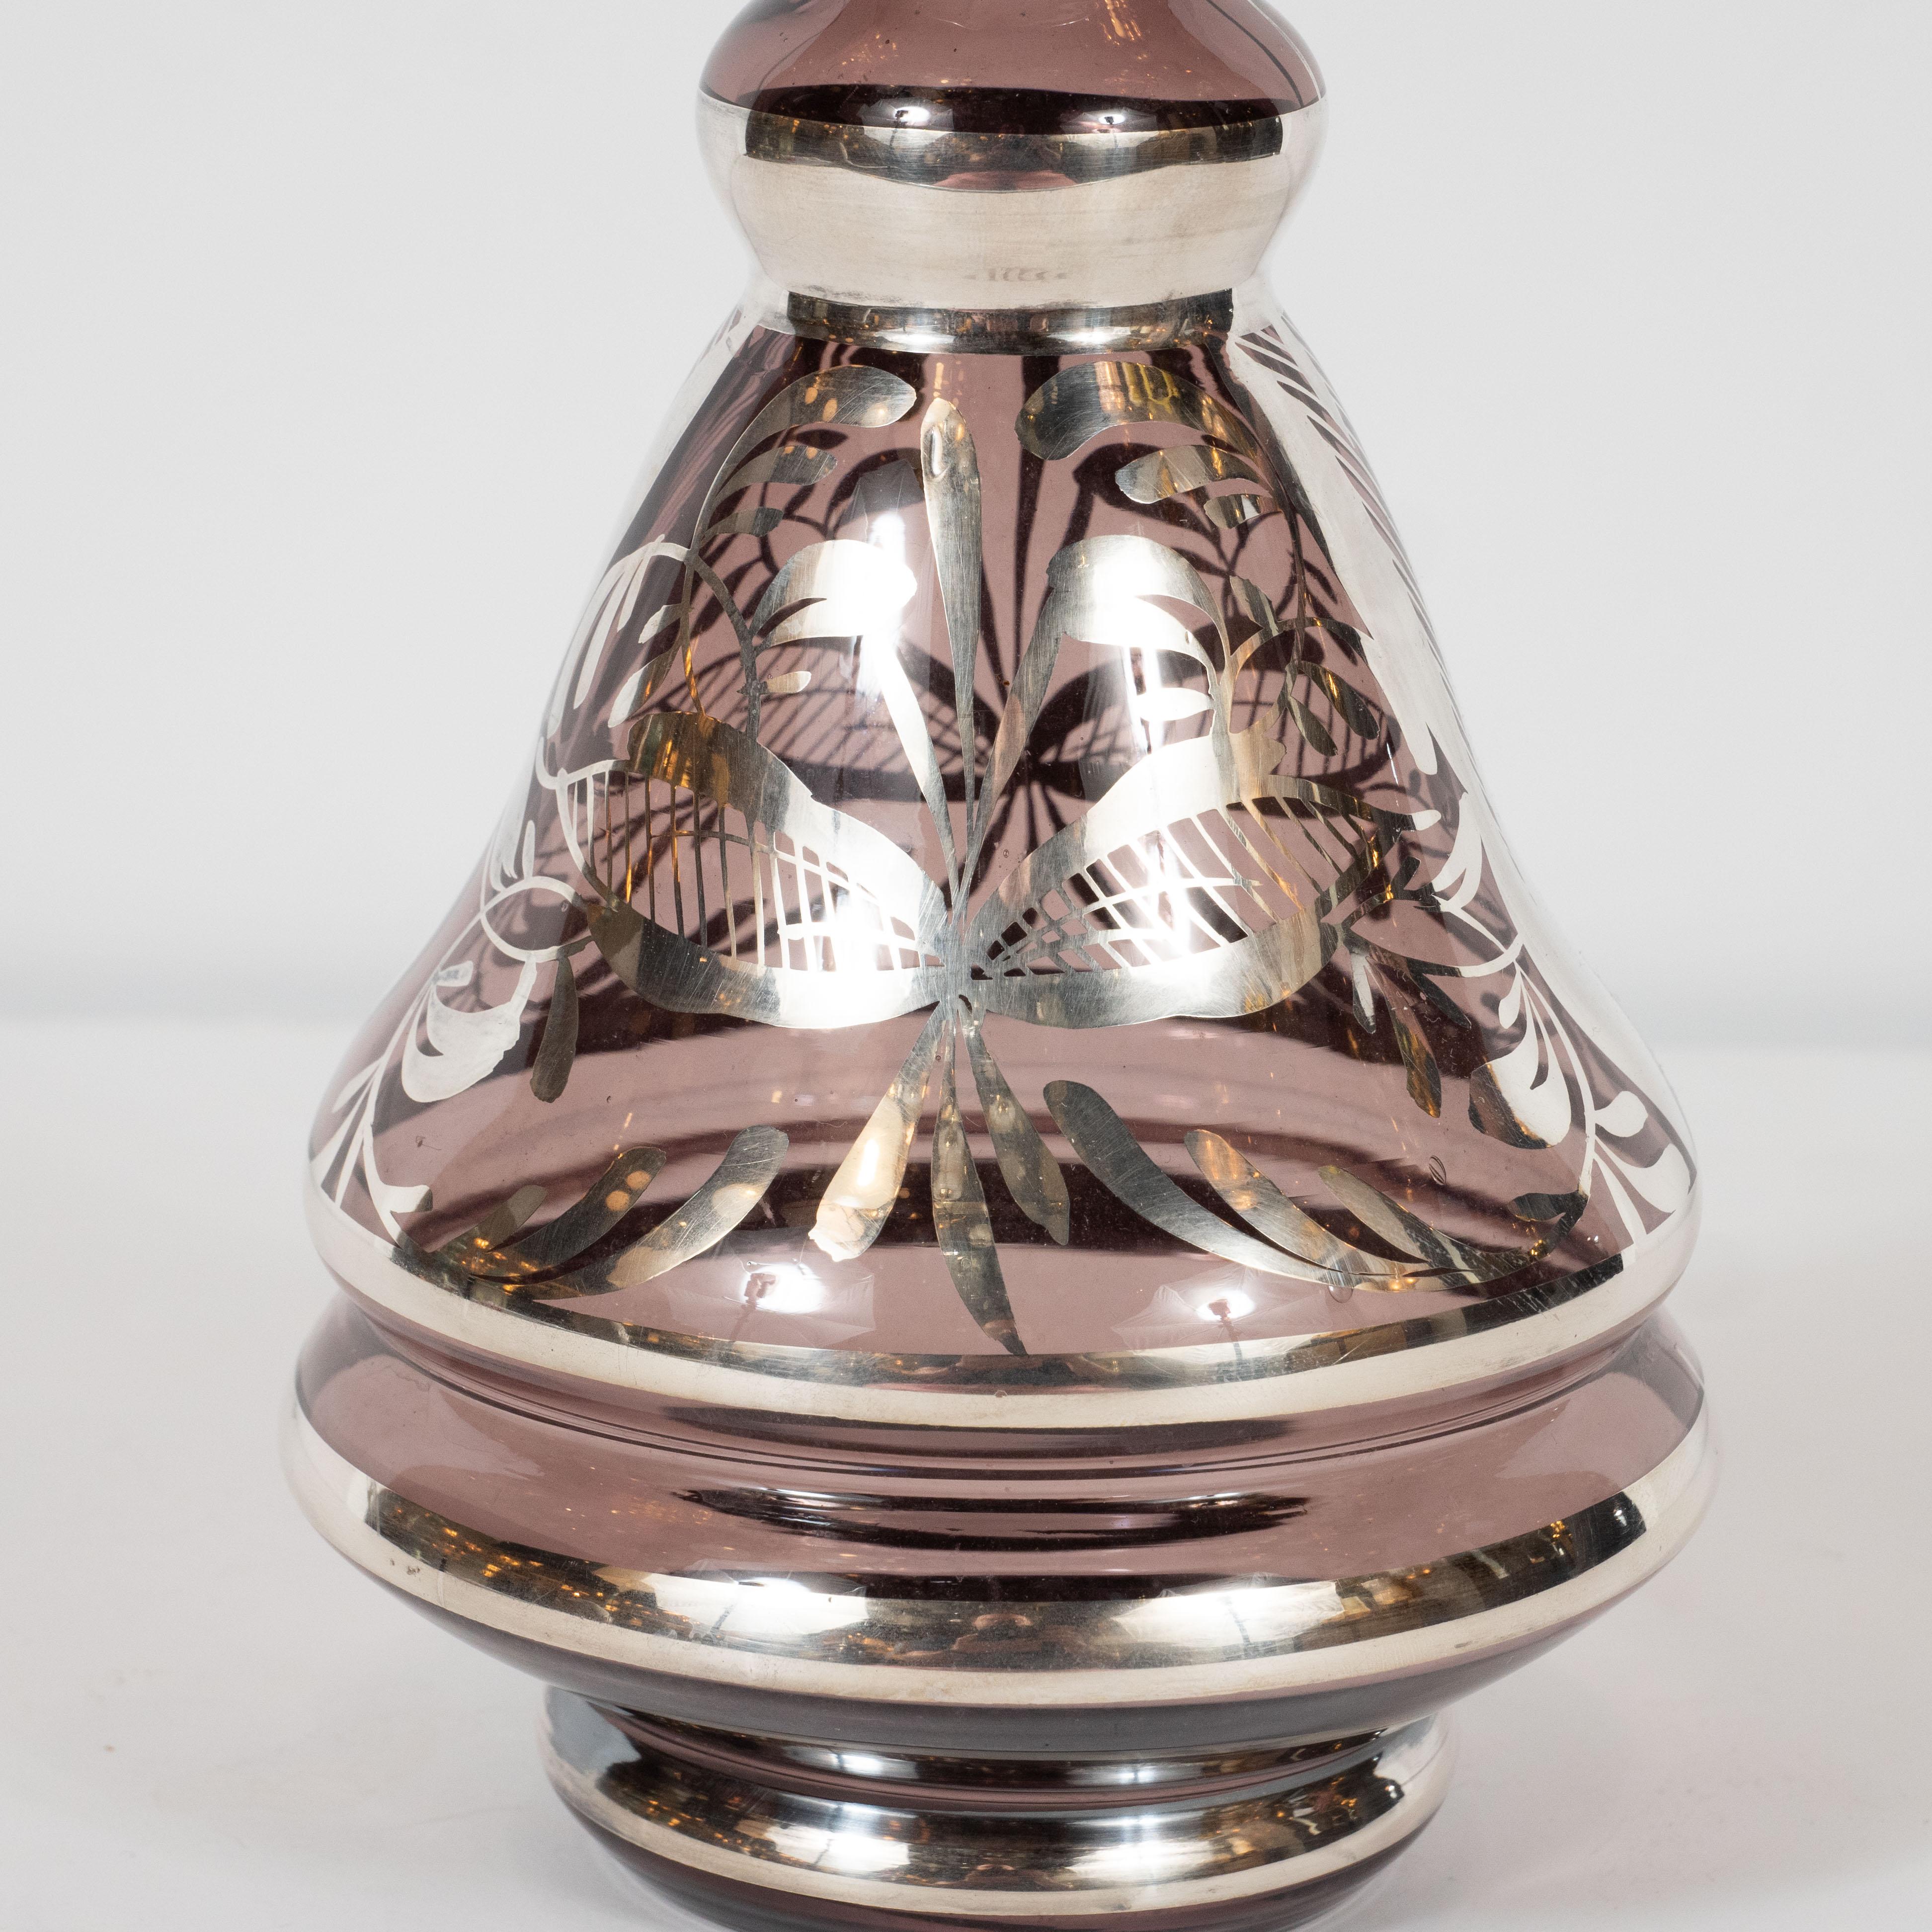 This gorgeous Art Deco decanter was realized in Czechoslovakia, circa 1930. It features a tiered skyscraper style base whose edges are finished with sterling silver, and a conical body in smoked amethyst glass. The neck features sinuous curves that